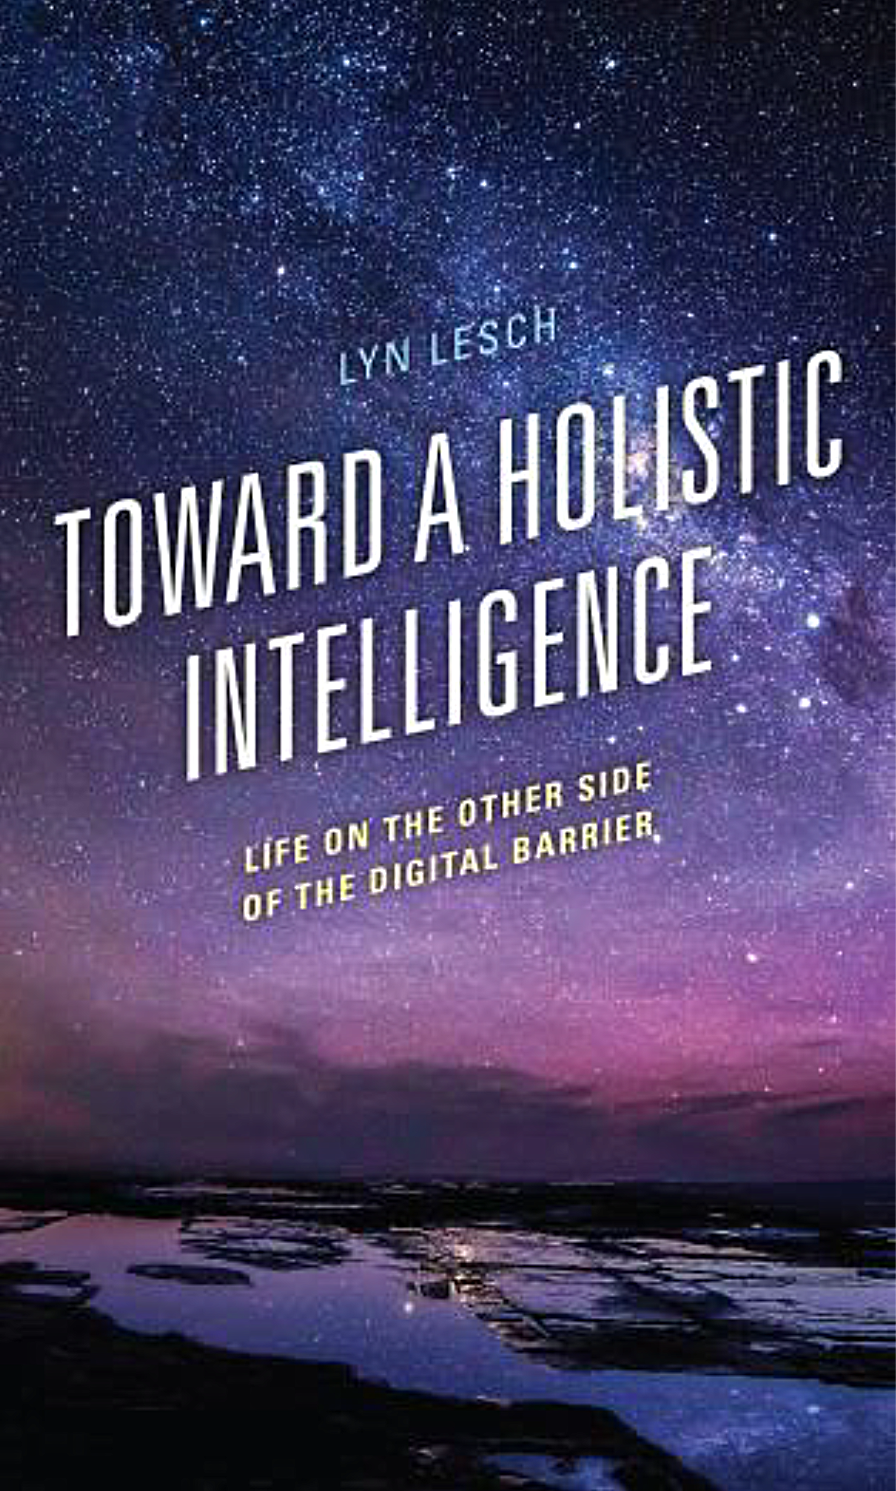 Toward a Holistic Intelligence: Life on the Other Side of the Digital Barrier